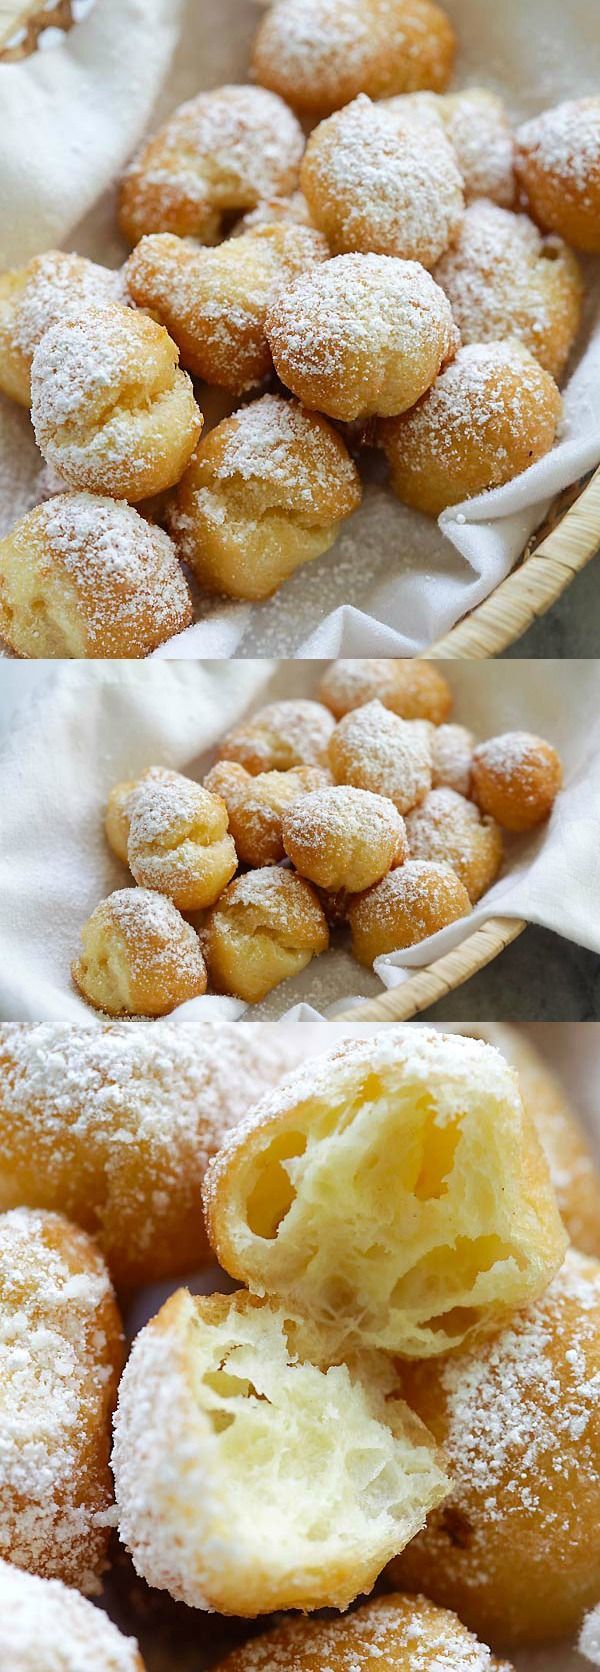 Homemade beignets have never been so easy and delicious! This easy beignet recipe